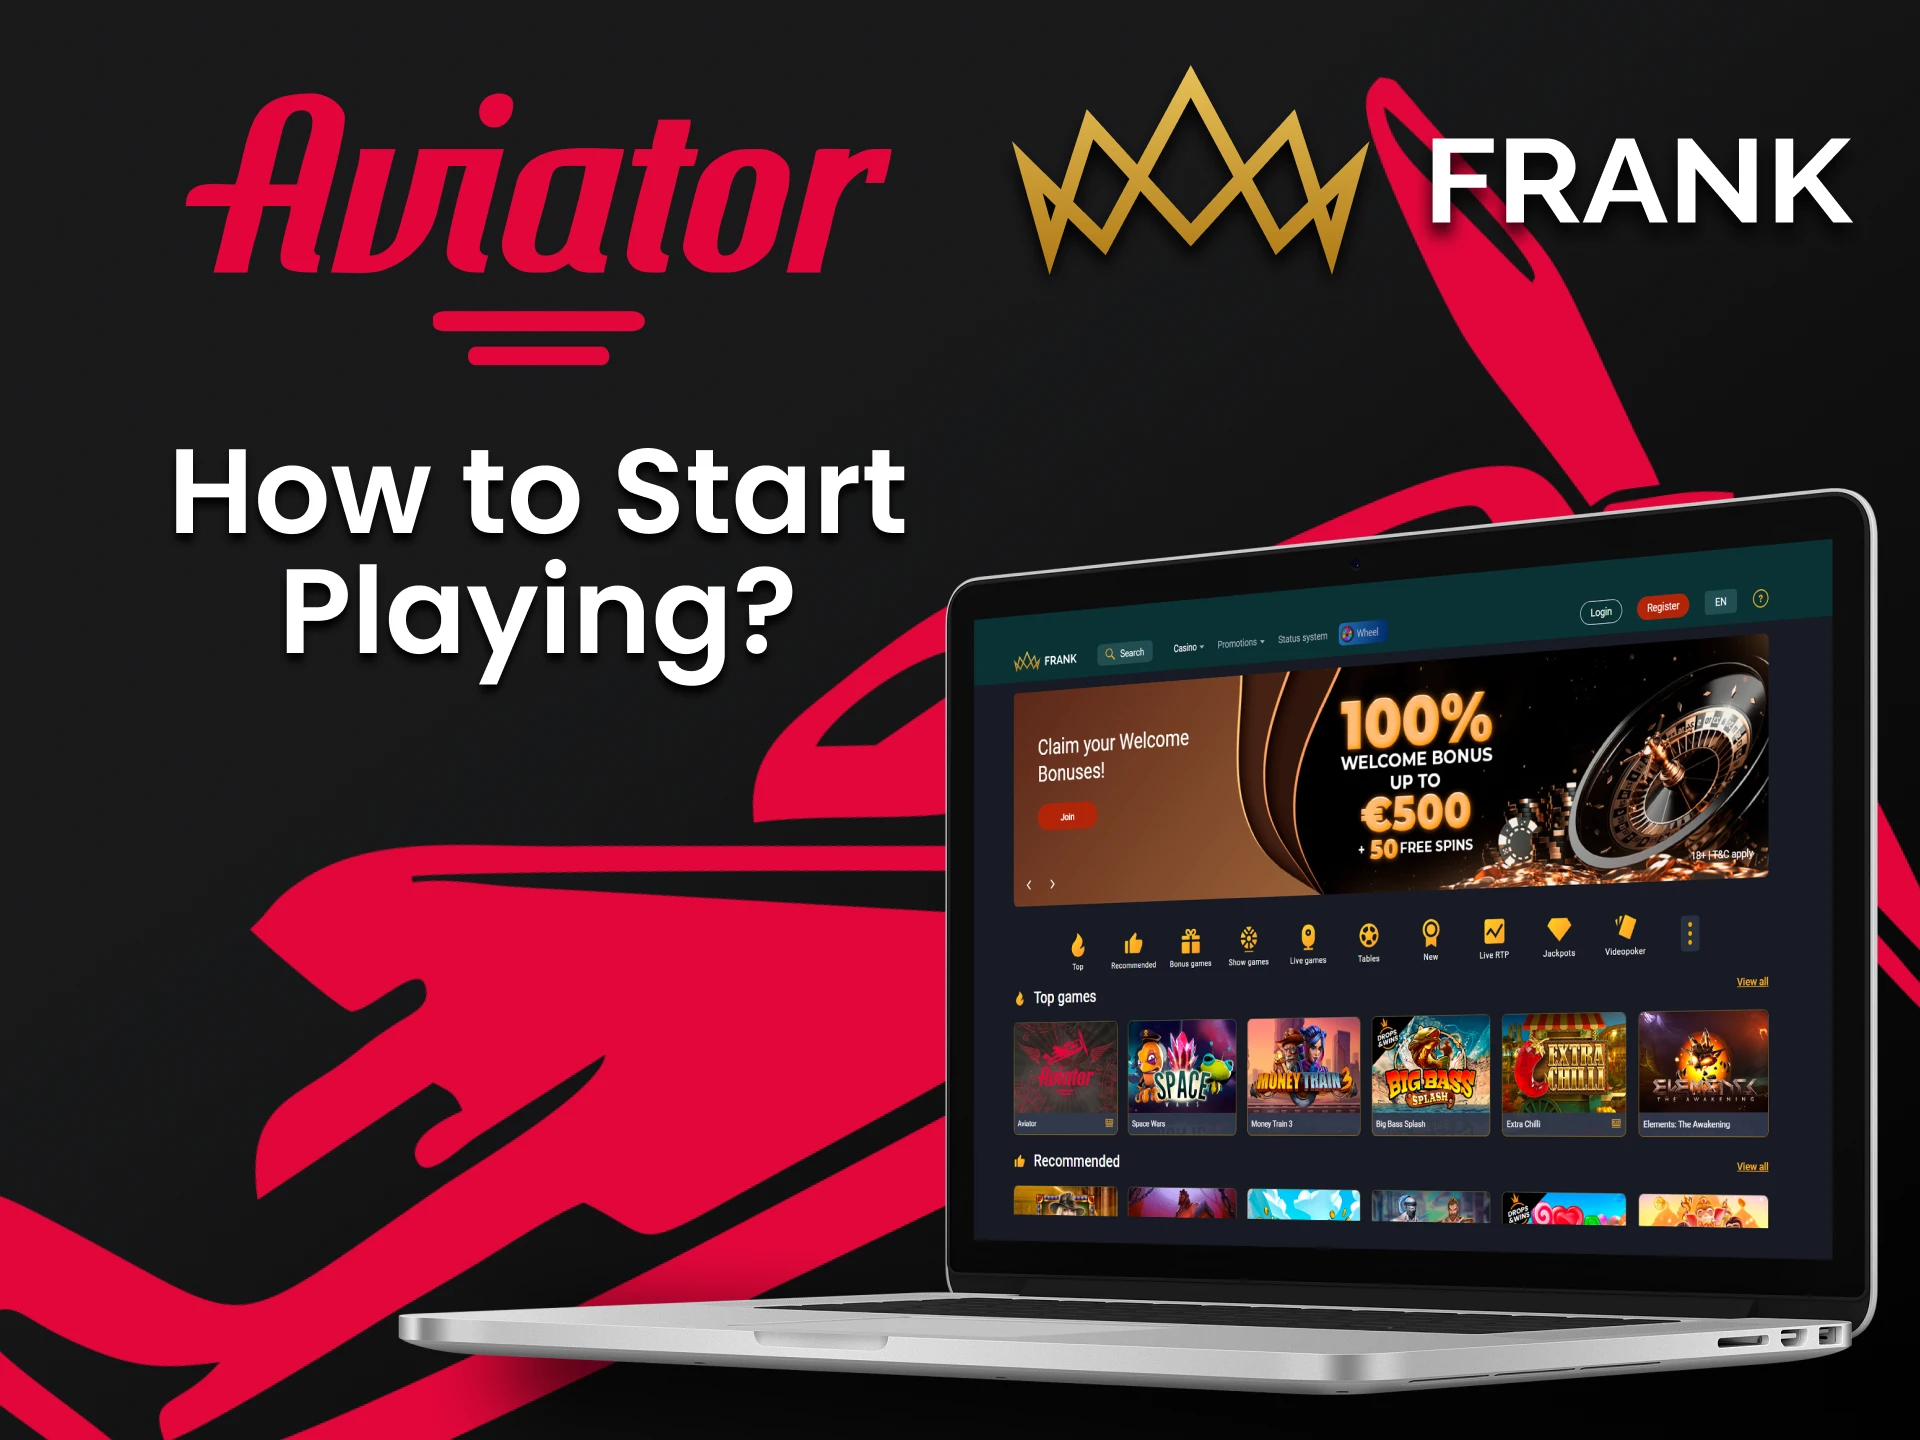 We will show you how to start playing Aviator at Frank Casino.